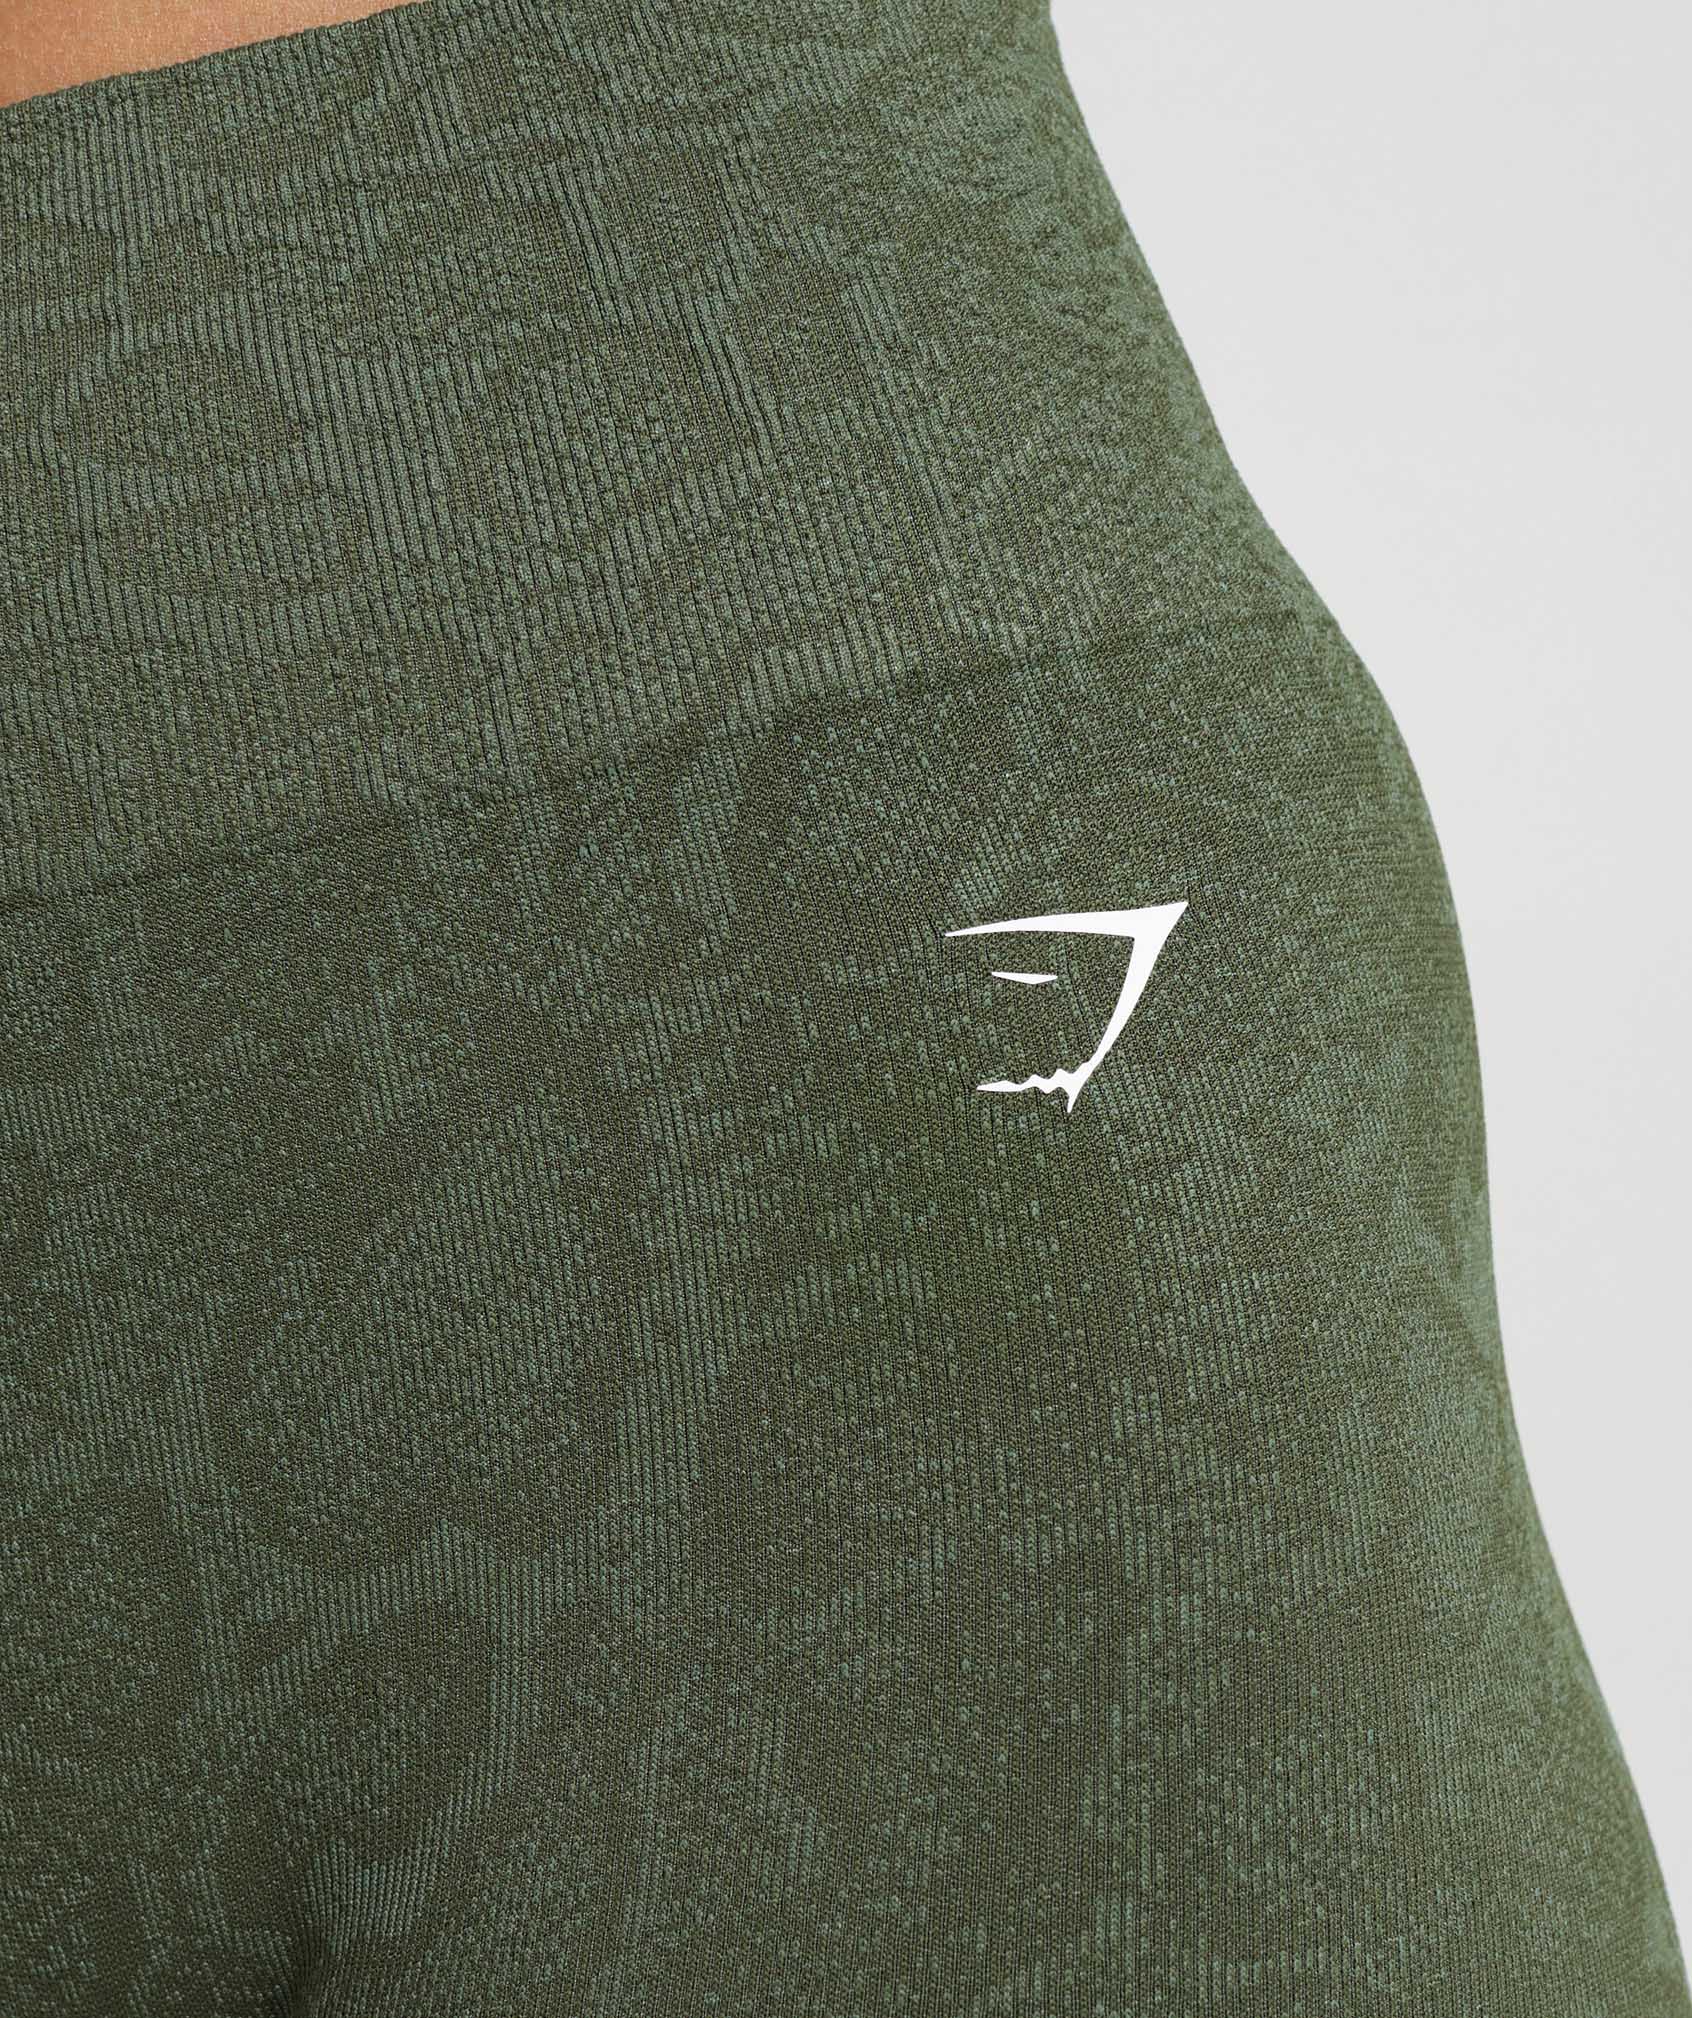 Adapt Animal Seamless Cycling Shorts in Willow Green/Core Olive